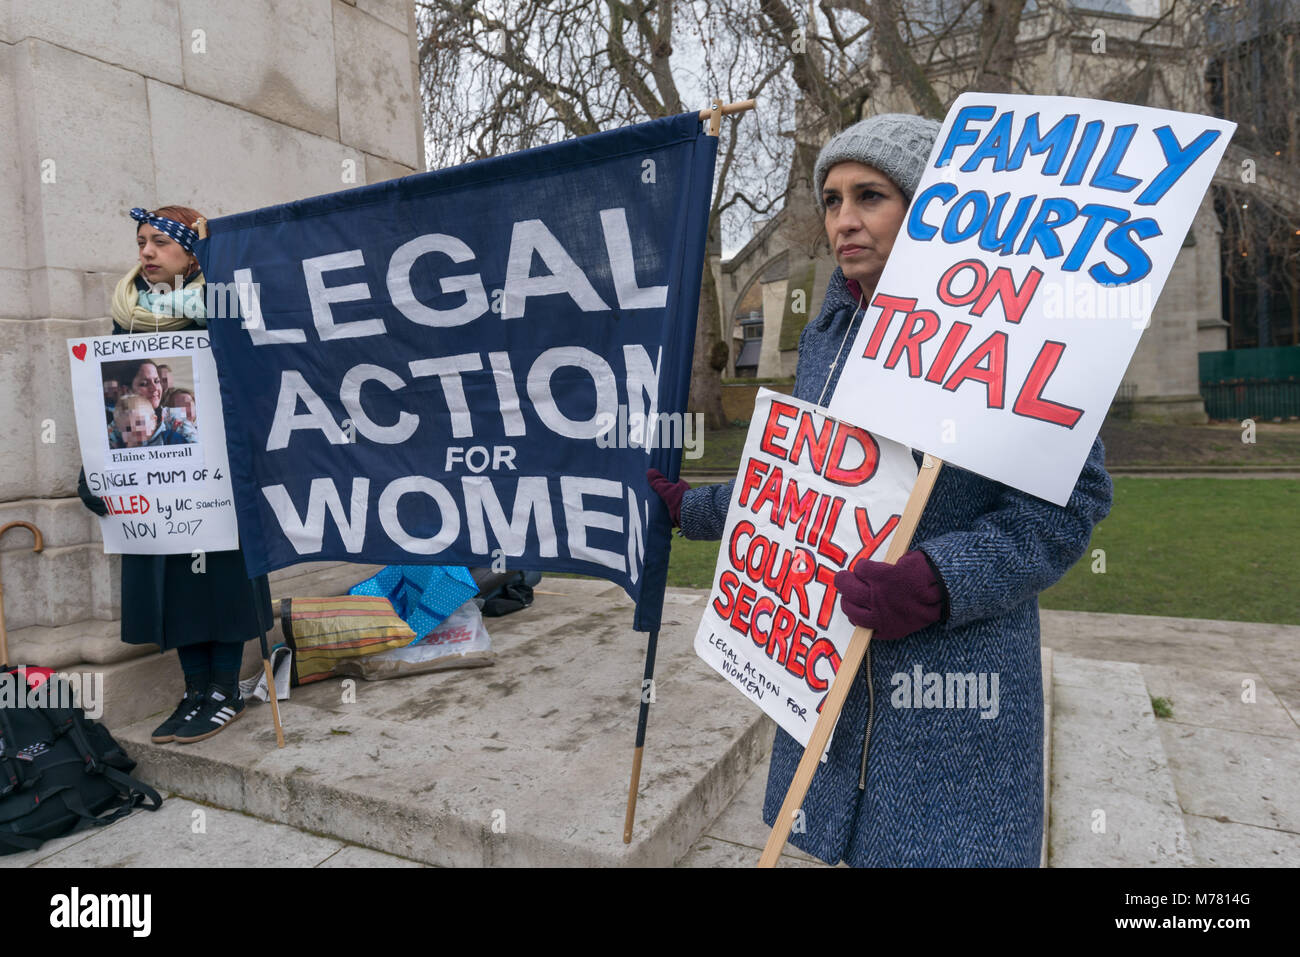 London, UK. 8th March 2018. People hold the Legal Action for Women banner and posters at the Global Women's Strike mock trial of the Family Courts in an International Women’s Day protest in front of Parliament. Speakers included mothers who have had children unjustly removed and others who read out shocking comments made in court by judges. portionately Credit: Peter Marshall/Alamy Live News Stock Photo